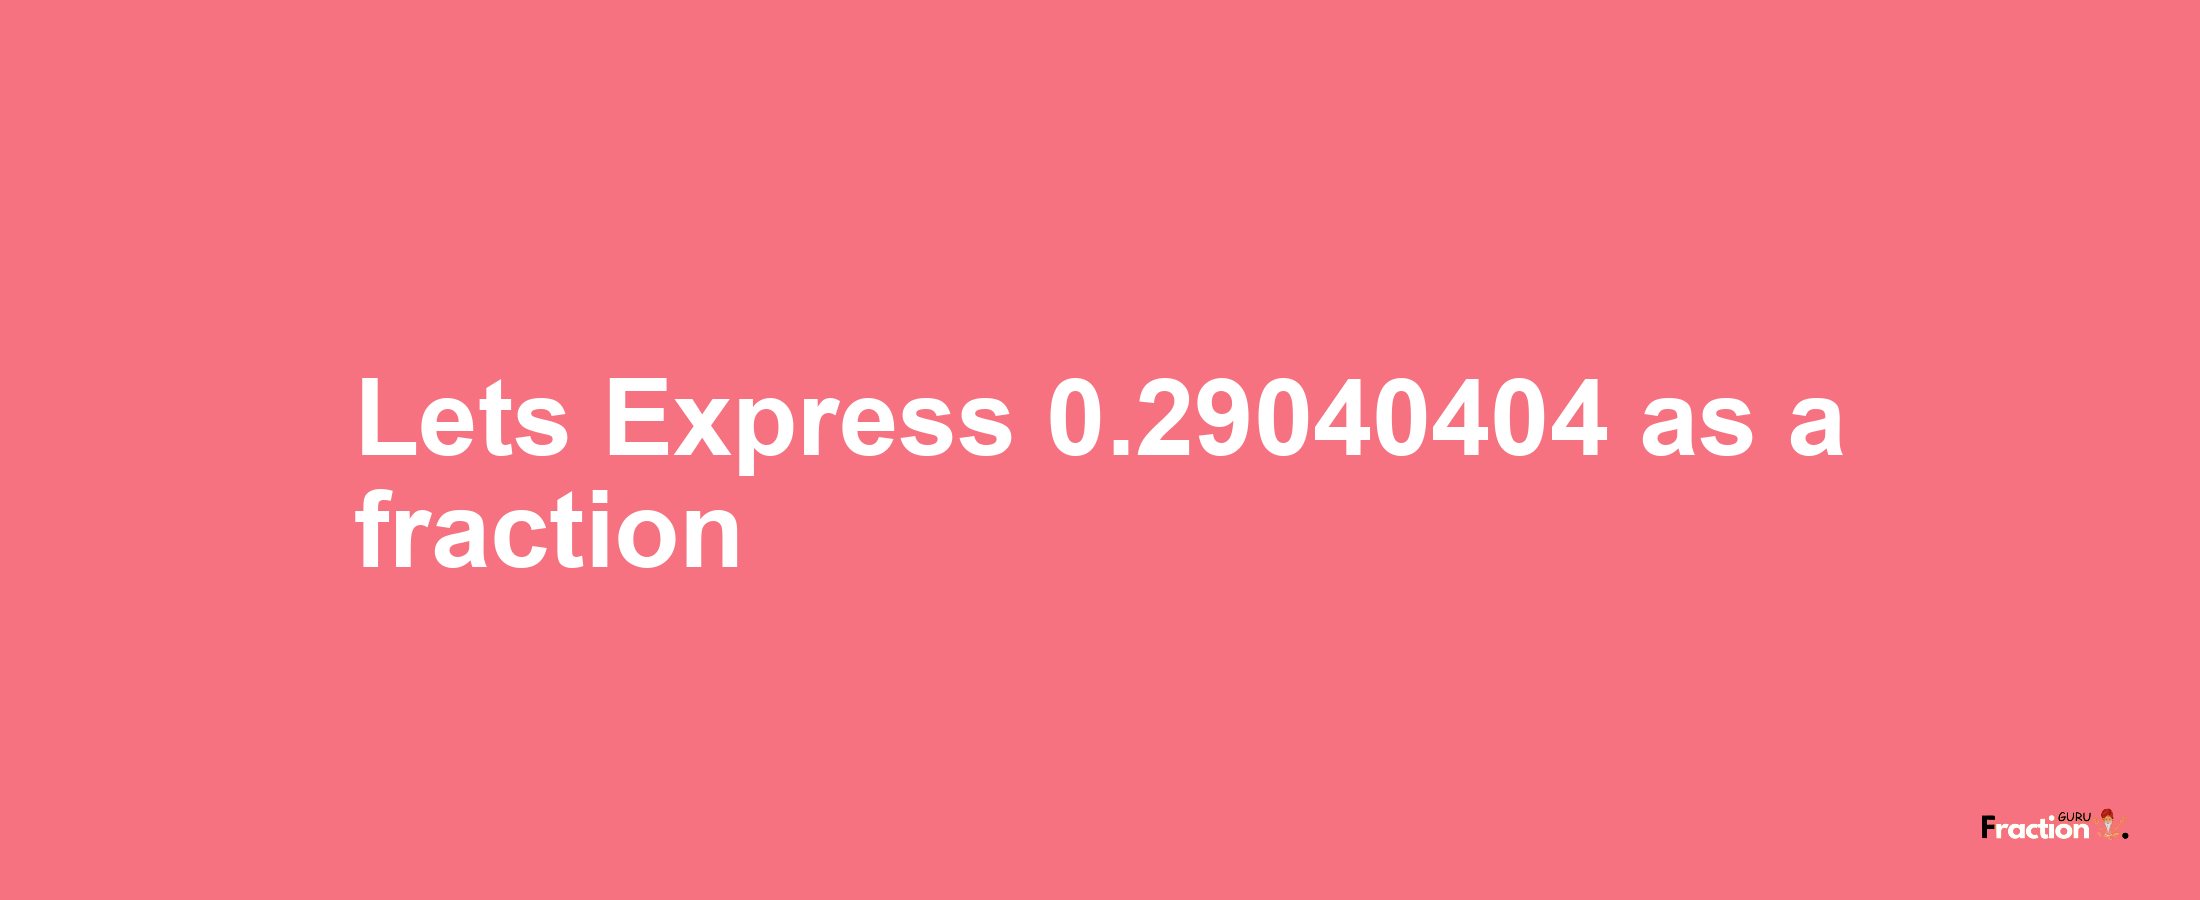 Lets Express 0.29040404 as afraction